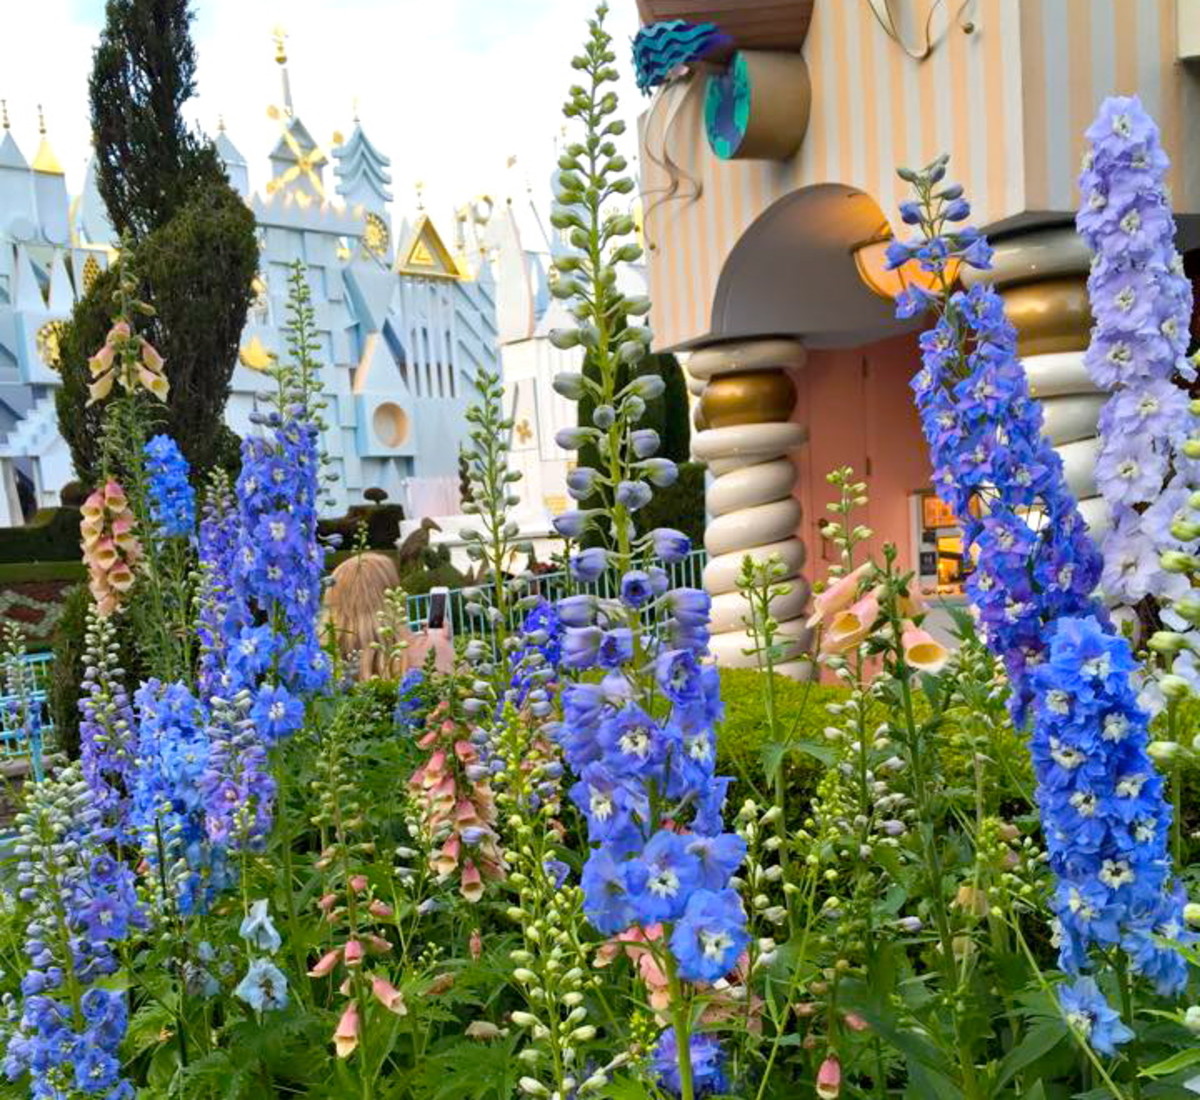 Here are some beautiful flowers in front of It's A Small World. 